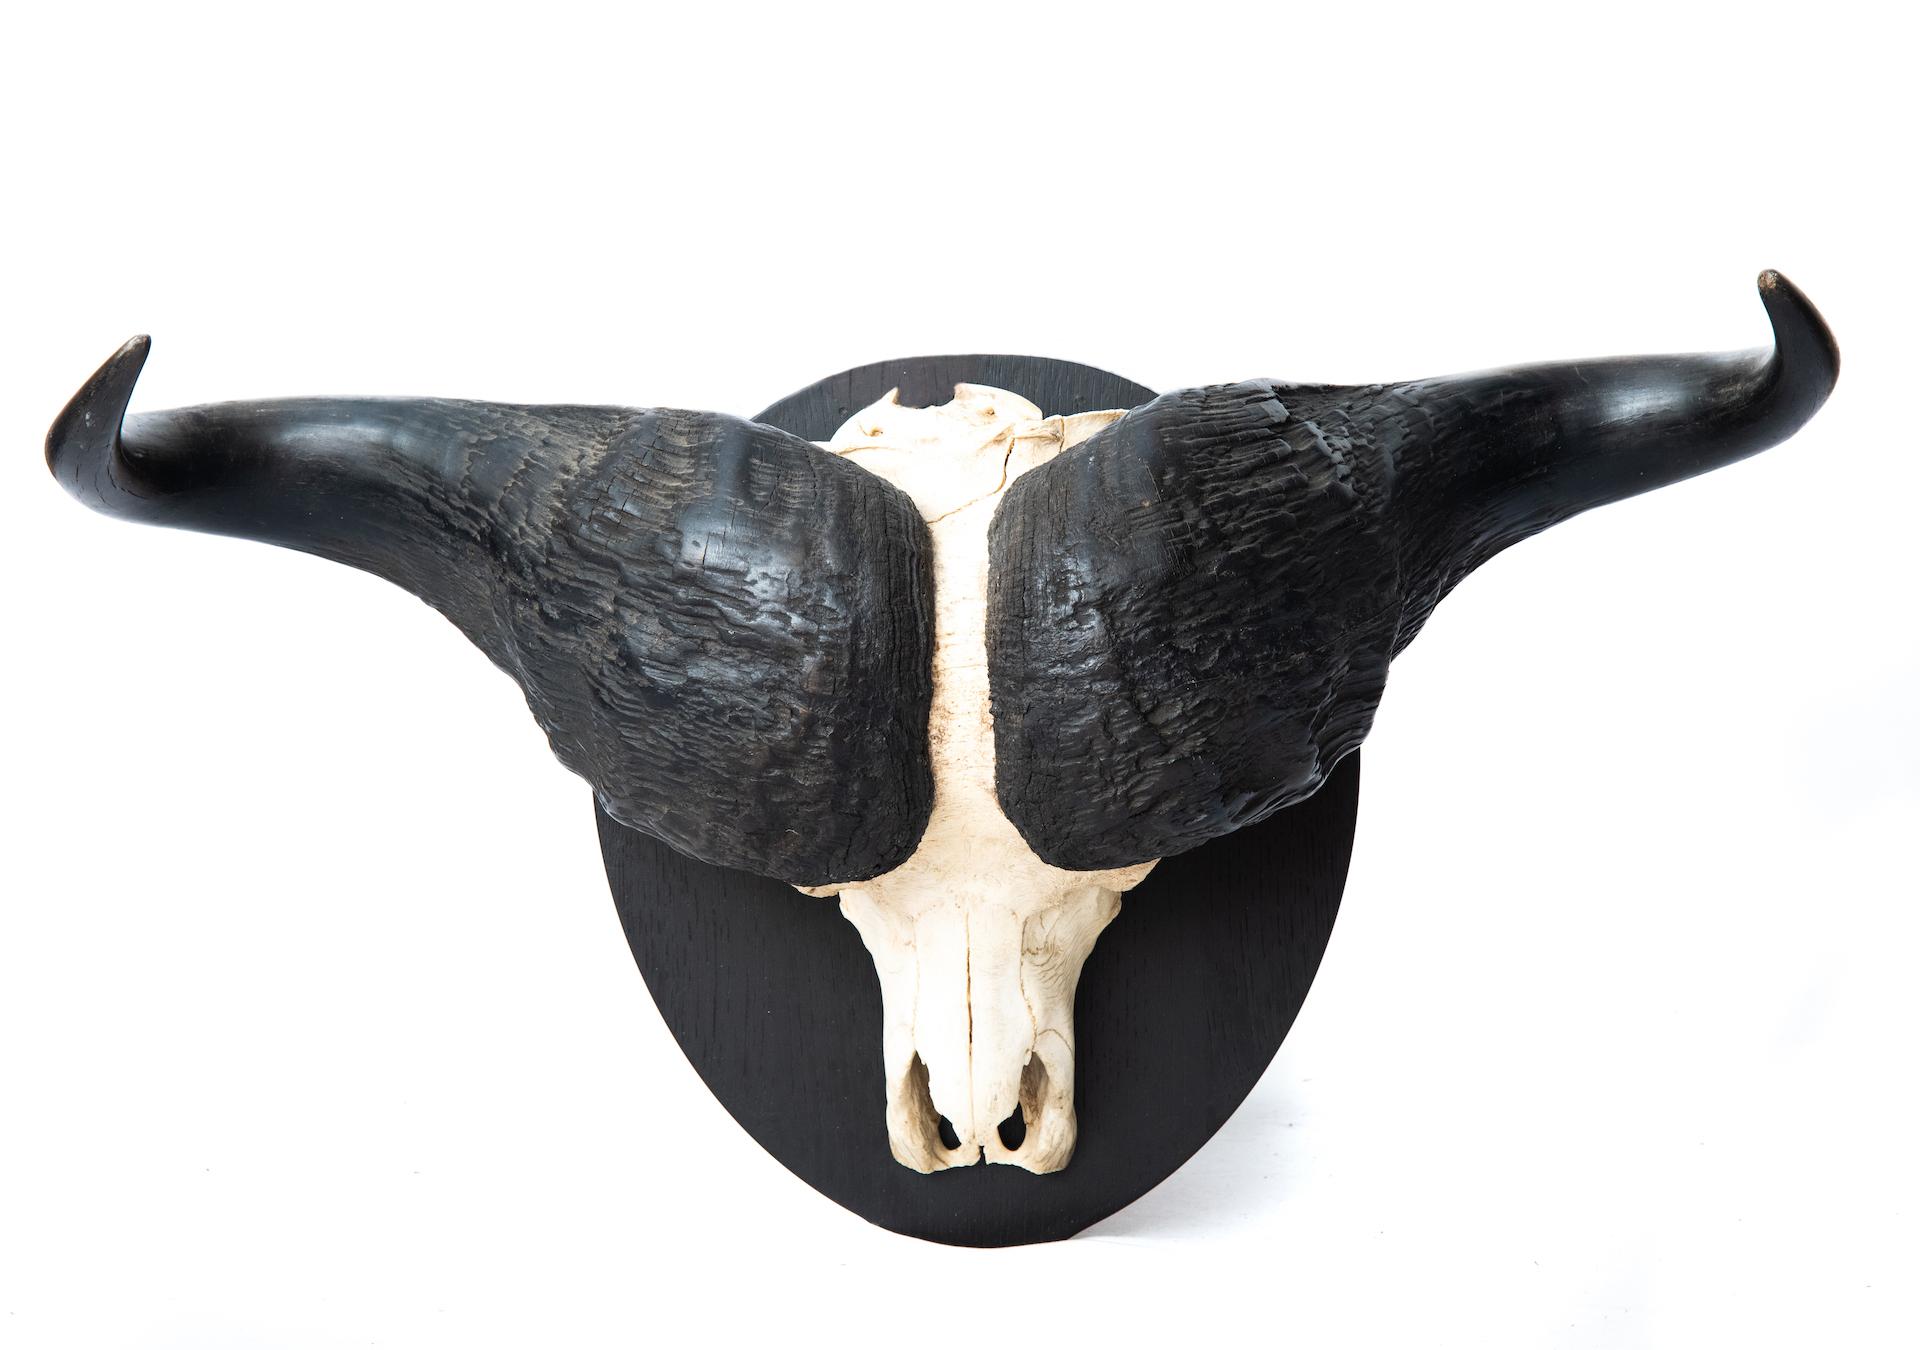 Huge and most impressive premium grade Cape buffalo taxidermy mount with undamaged full skull. The custom ebonized plaque is new and is outfitted with an aluminum cleat system to insure secure hanging.